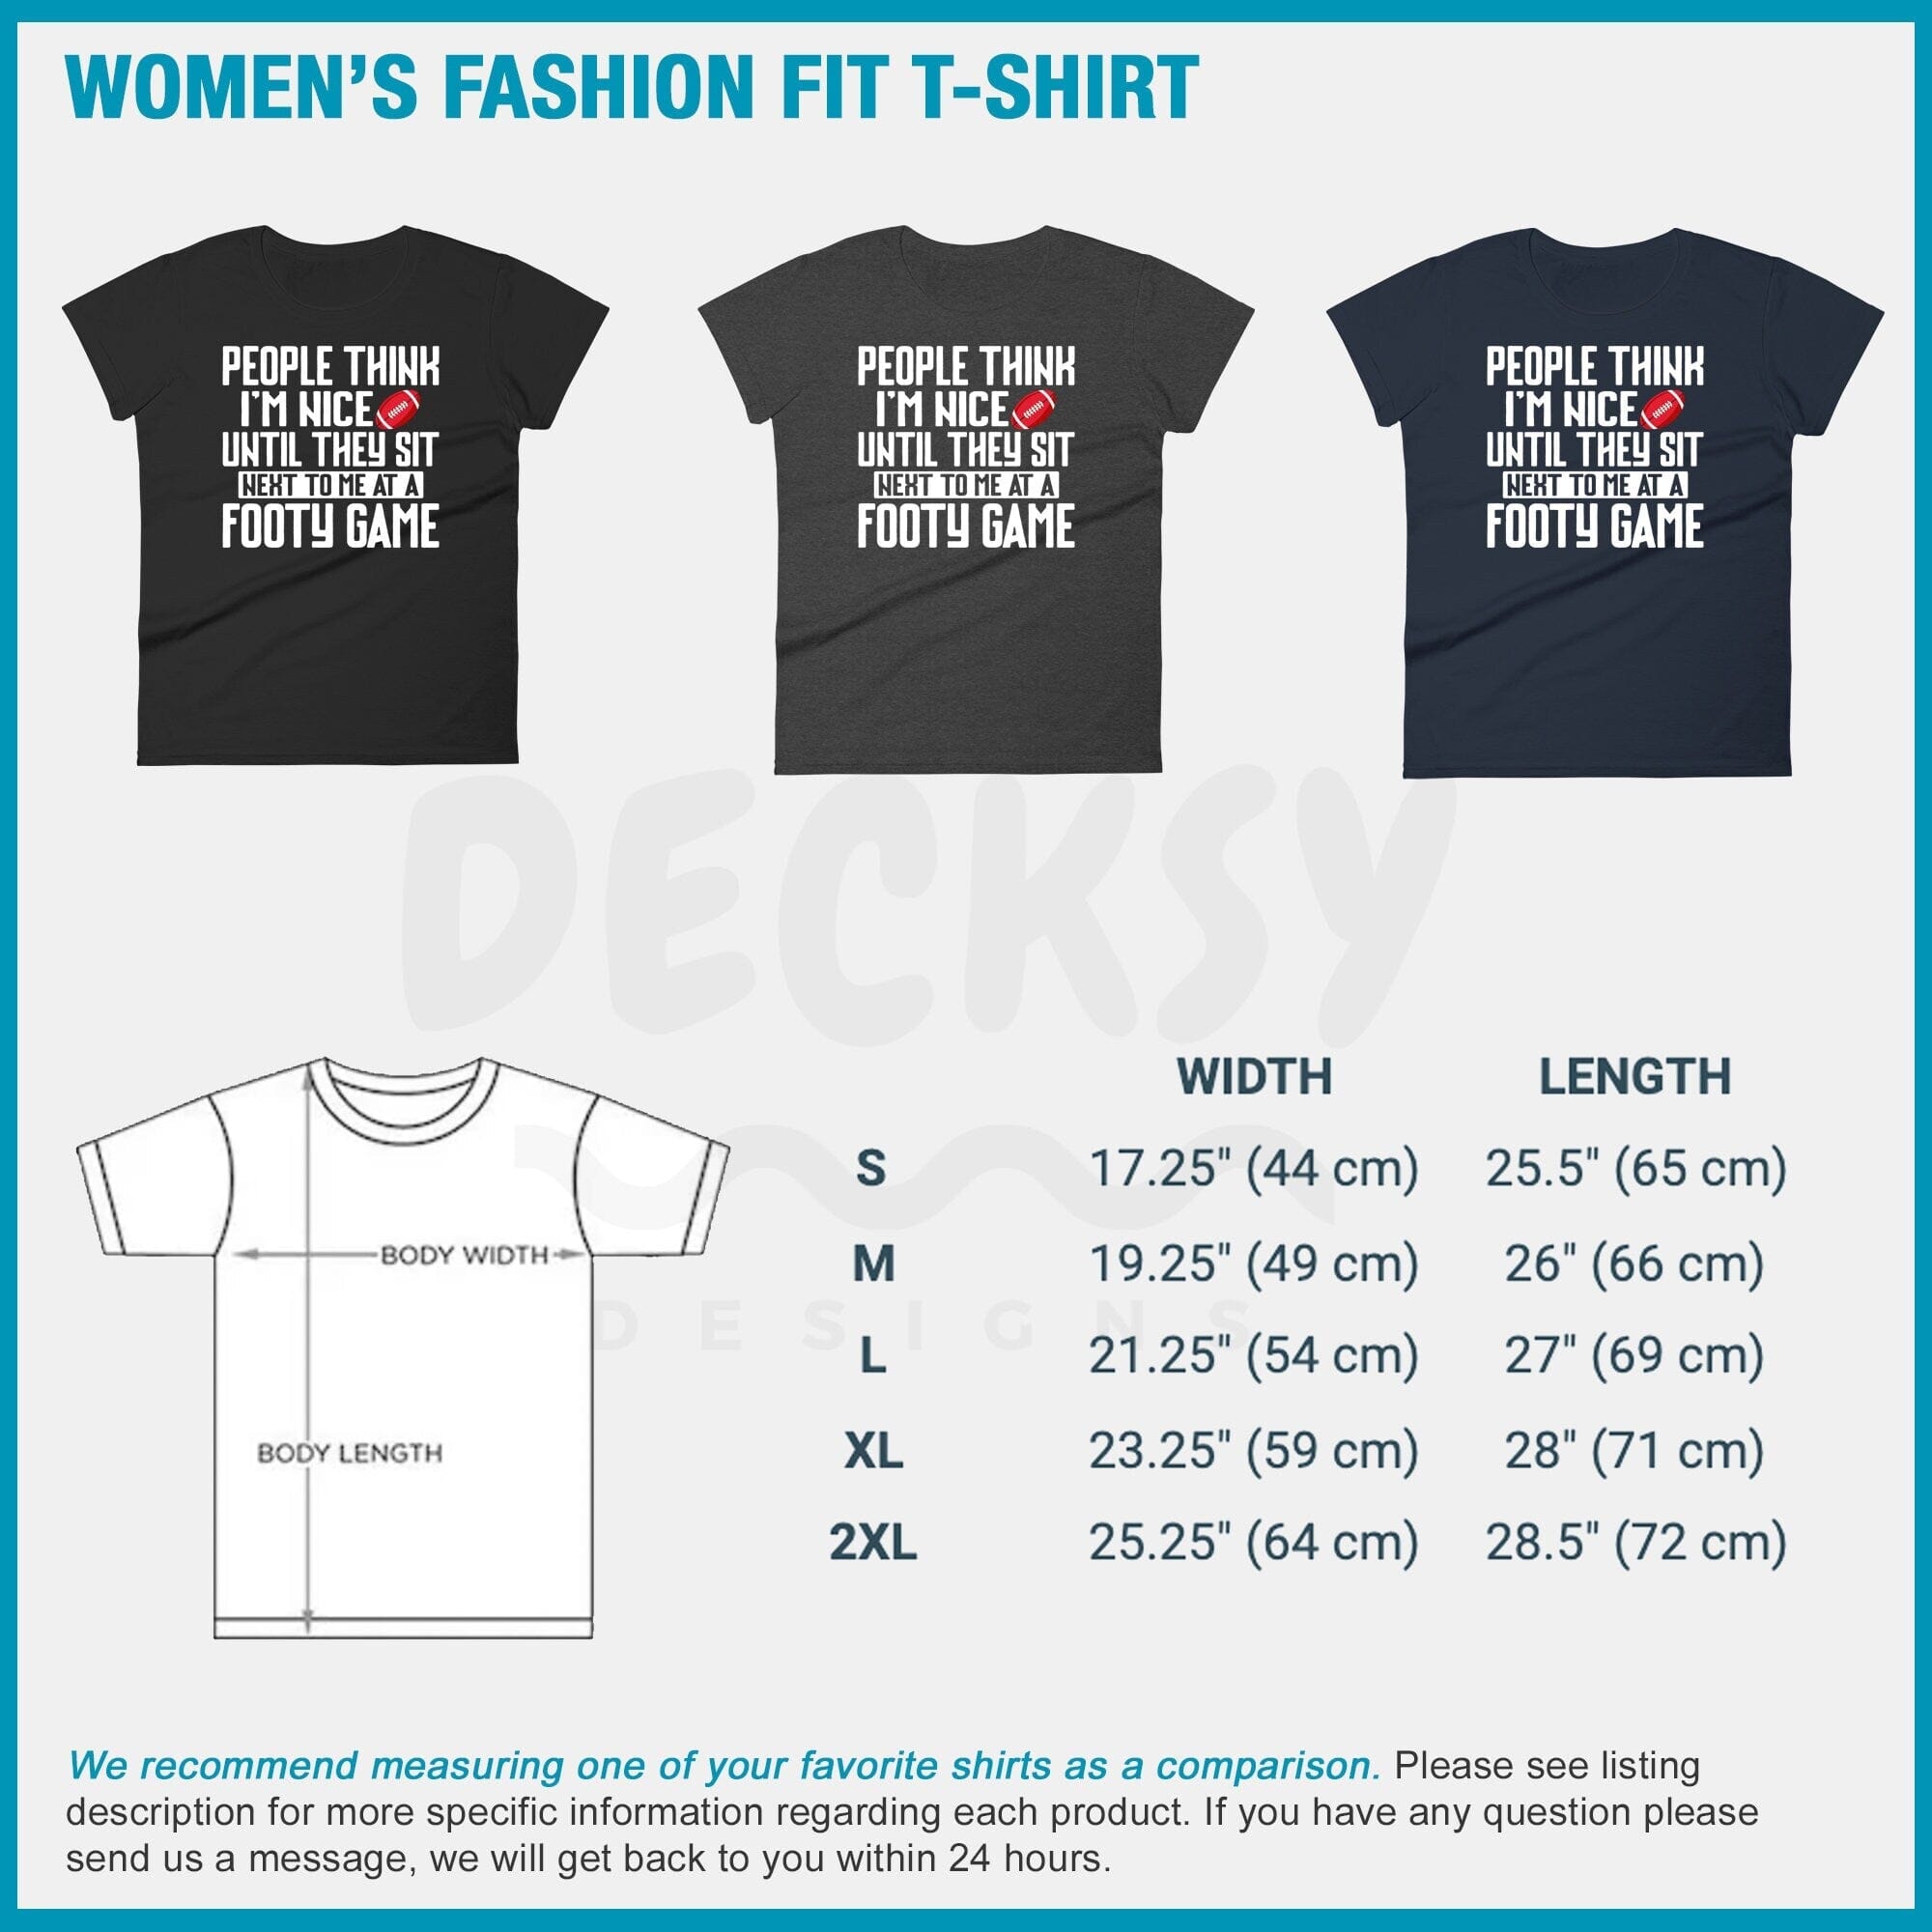 Football Lover Gift, Sports Shirt-Clothing:Gender-Neutral Adult Clothing:Tops & Tees:T-shirts:Graphic Tees-DecksyDesigns